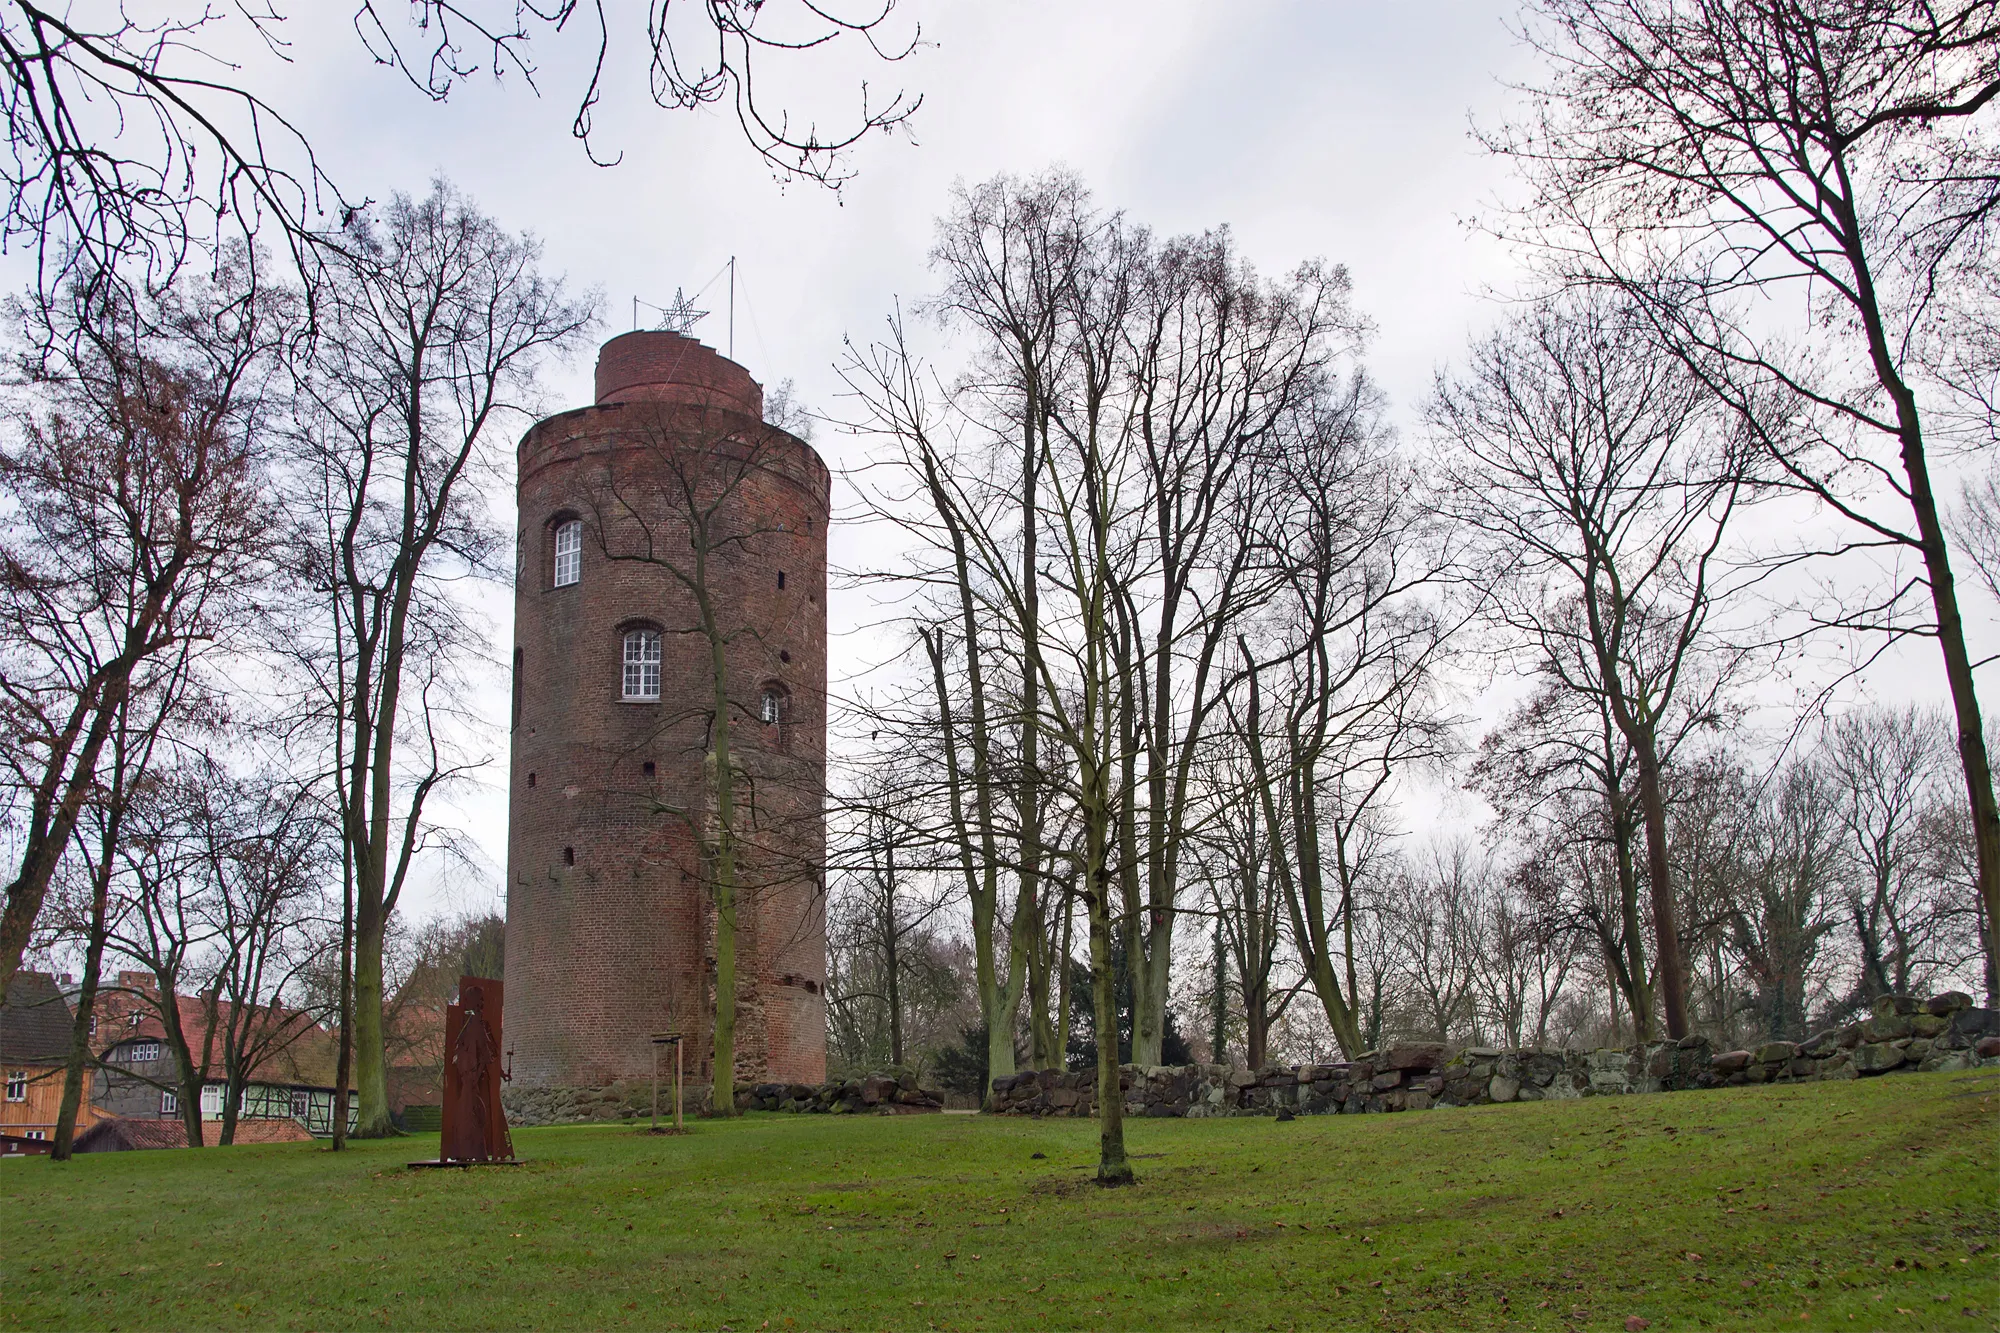 Photo showing: Tower "Amtsturm", only remains of a former castle in the small town Lüchow (district Lüchow-Dannenberg, northern Germany).